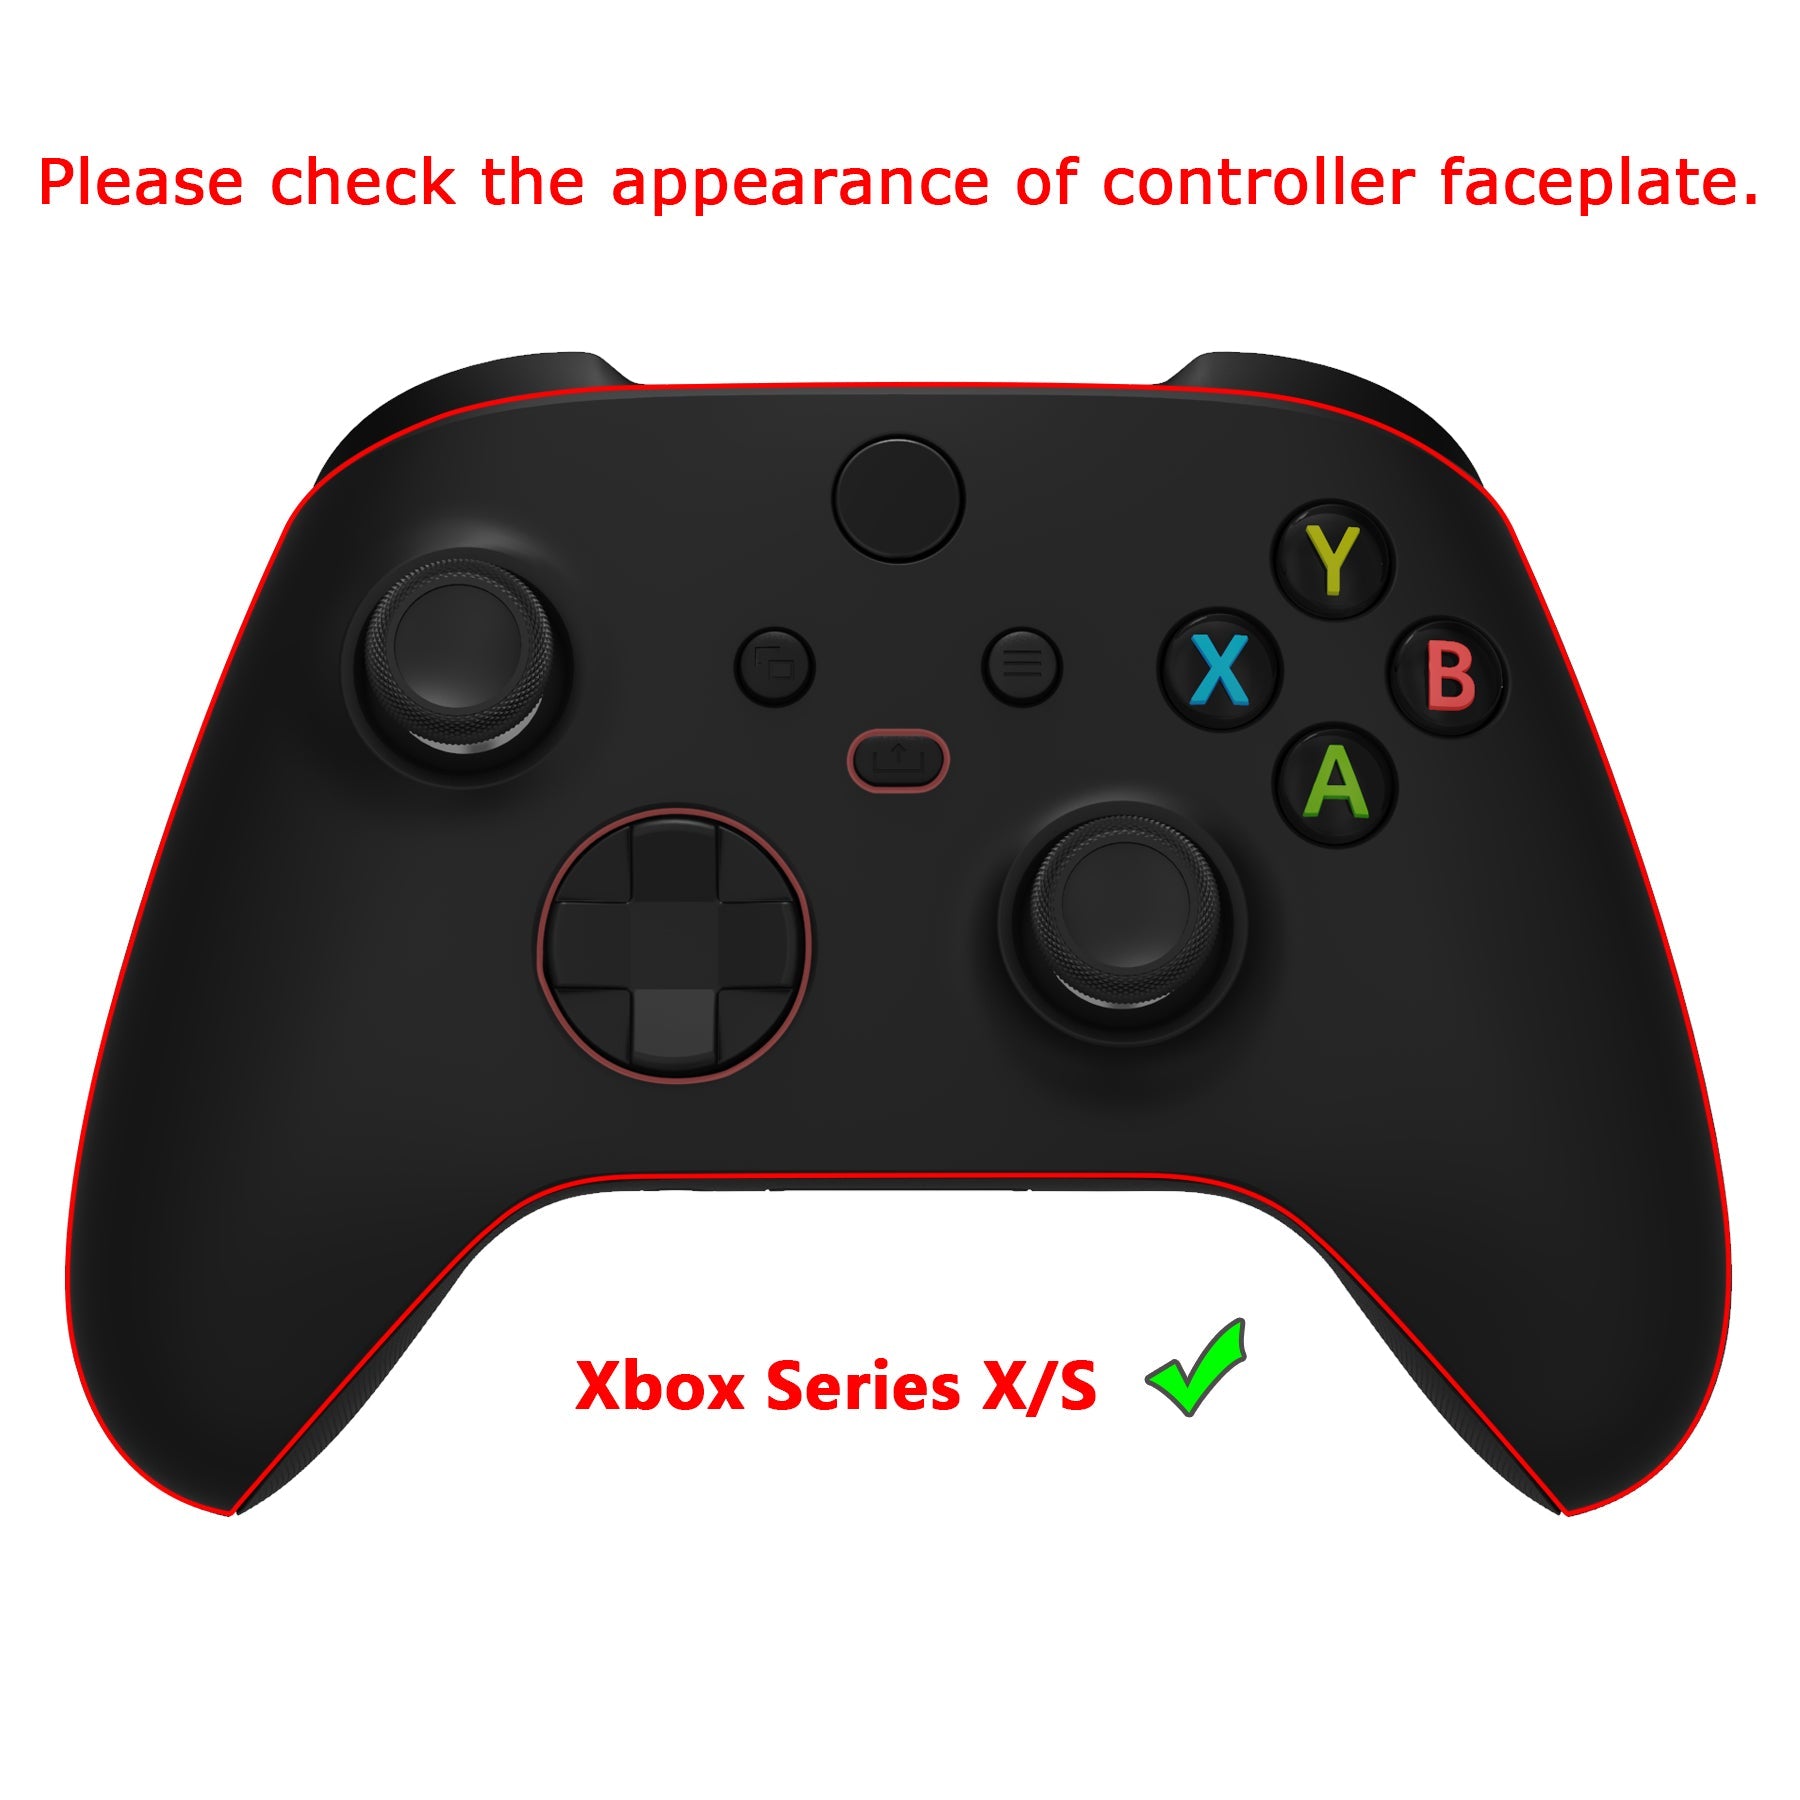 PlayVital Clown Hahaha Anti-Skid Sweat-Absorbent Controller Grip for Xbox Series X/S Controller, Professional Textured Soft Rubber Pads Handle Grips for Xbox Series X/S Controller - X3PJ044 PlayVital